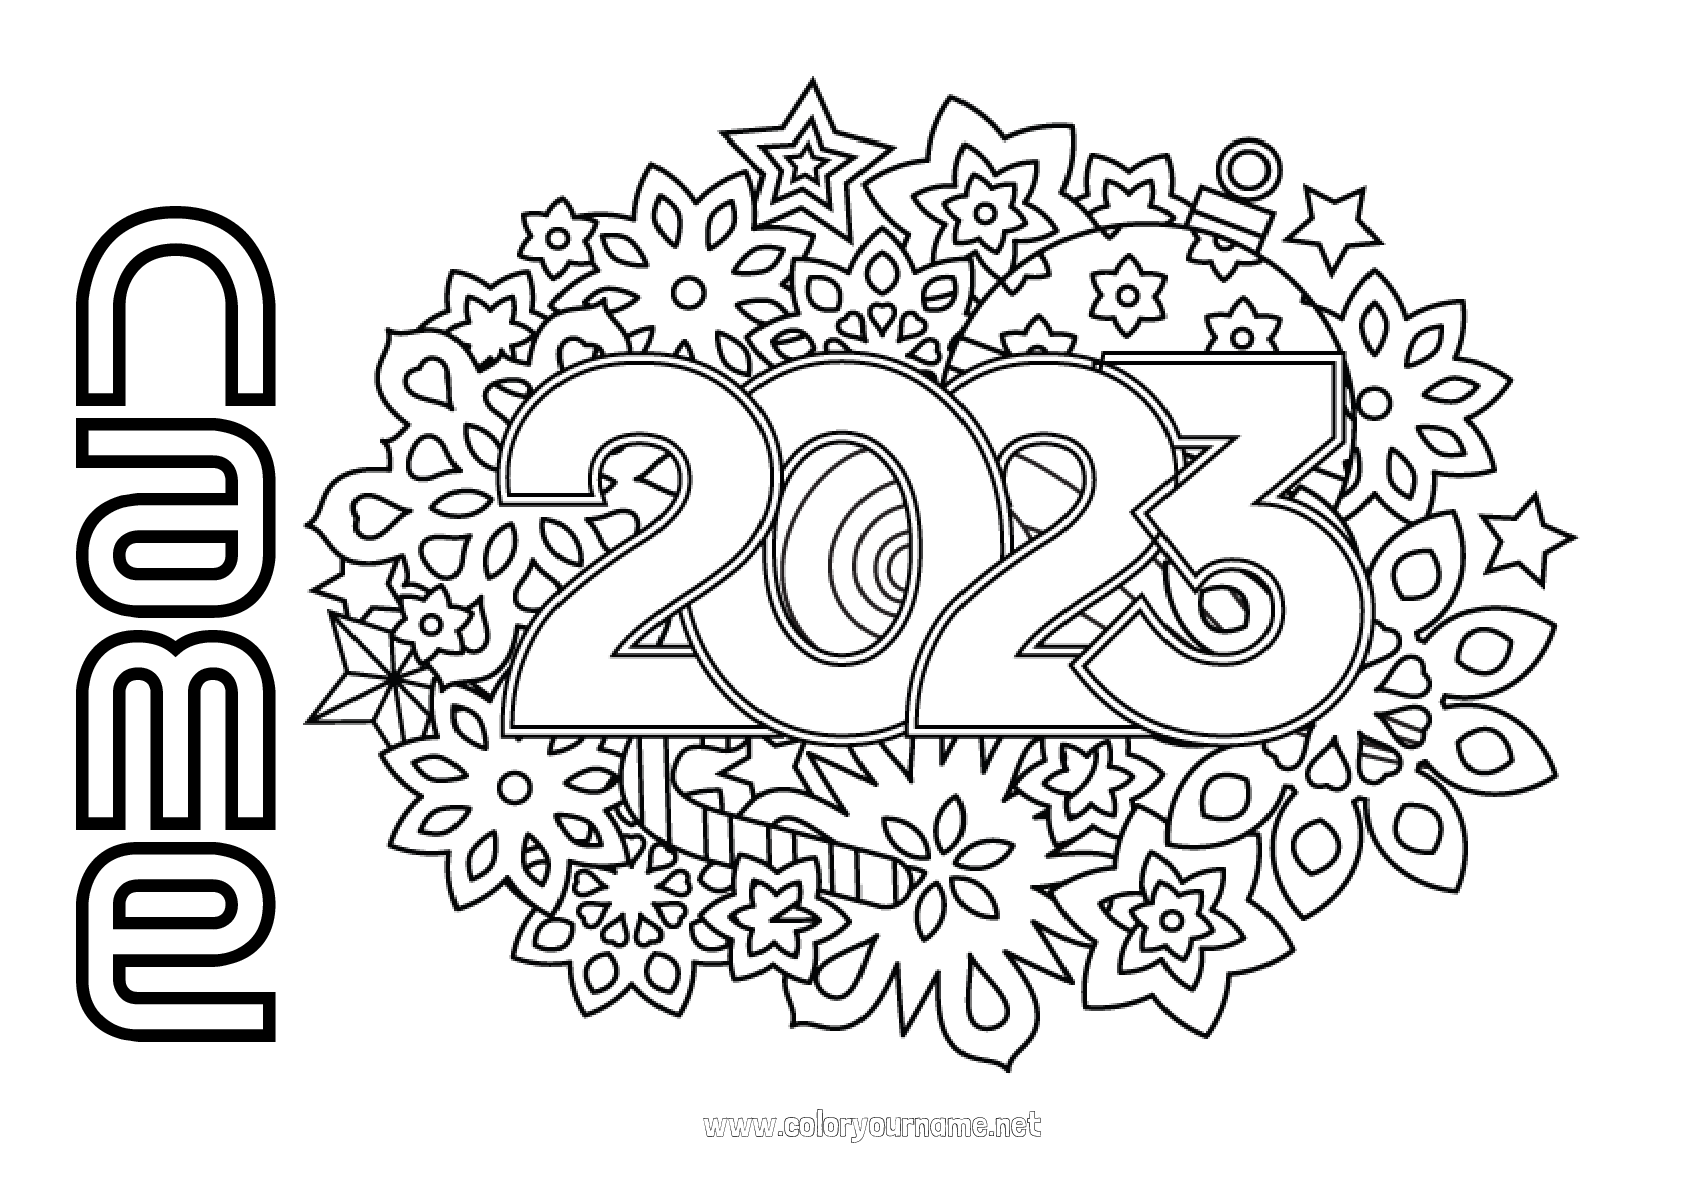 Coloring page No.431 - Happy new year